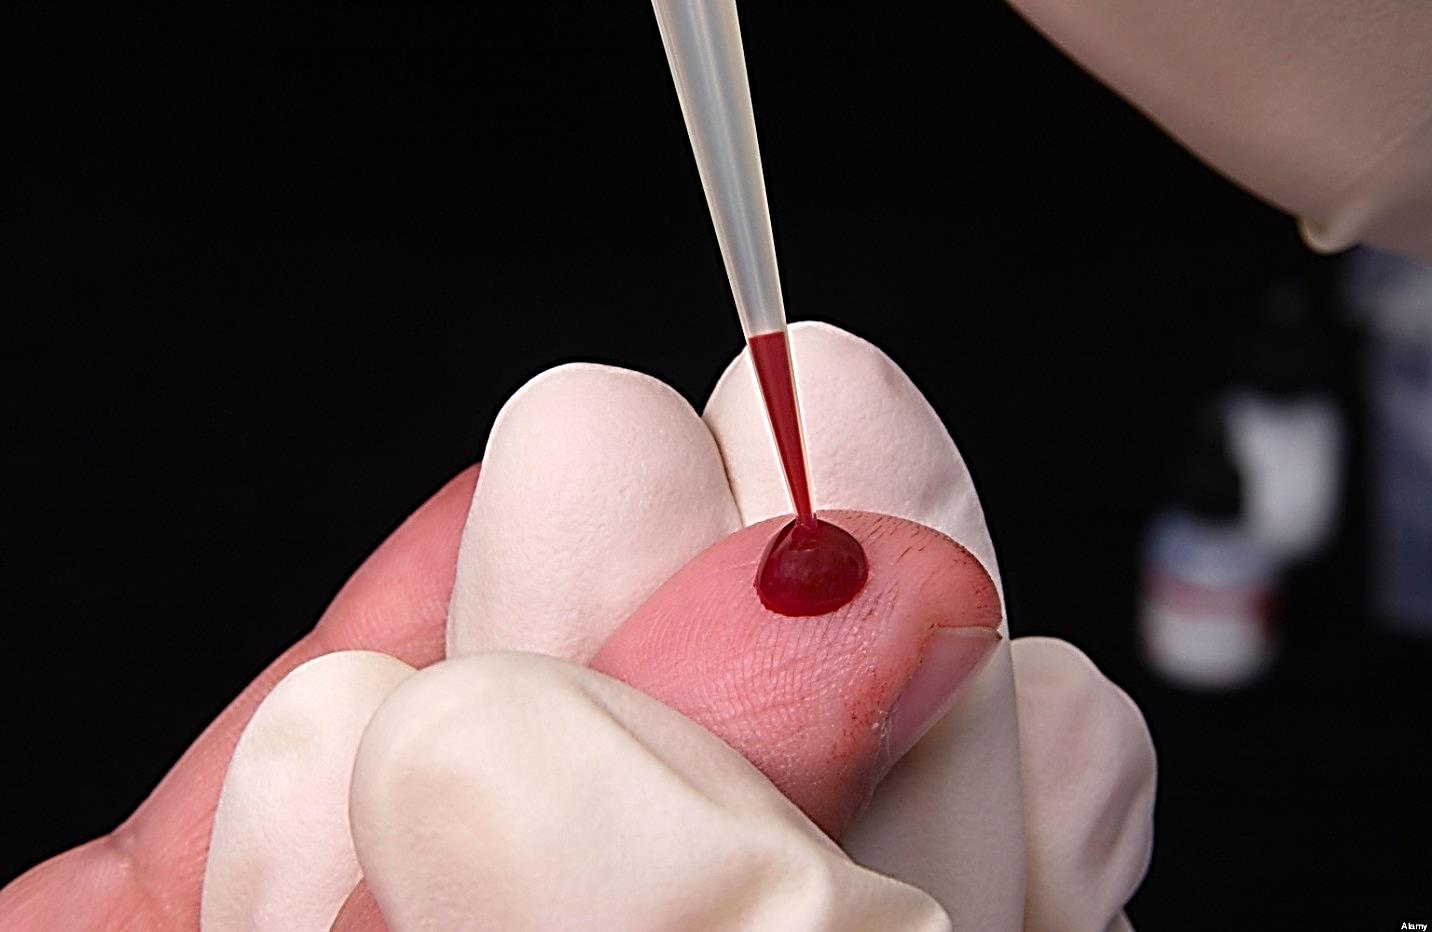 Image: Blood obtained via fingerstick is commonly used in point-of-care assays (Photo courtesy of The Health).